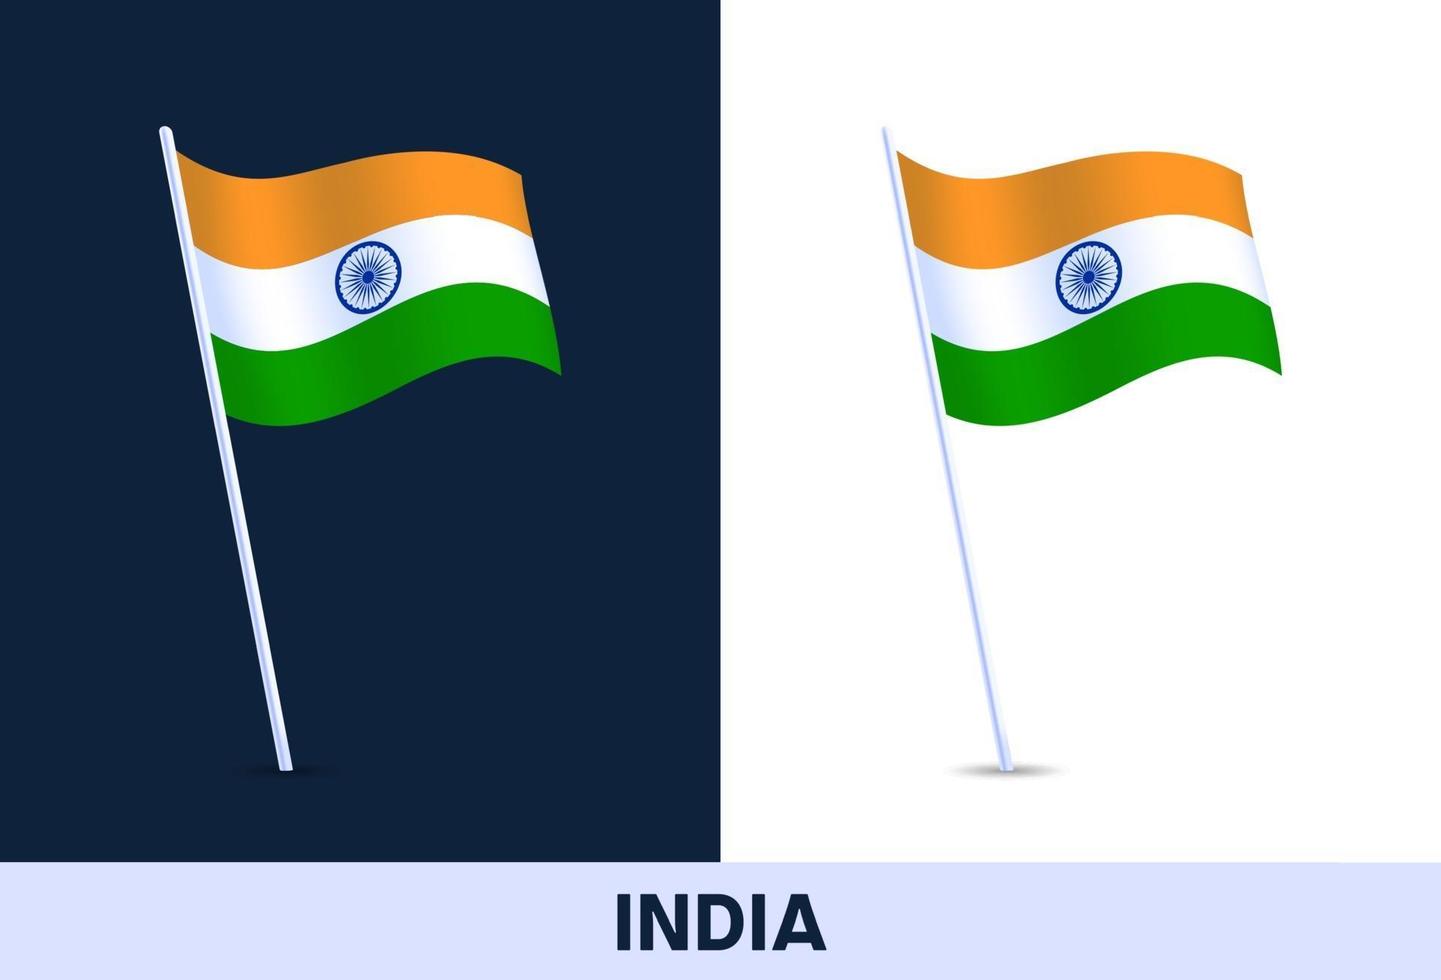 india vector flag. Waving national flag of Italy isolated on white and dark background. Official colors and proportion of flag. Vector illustration.